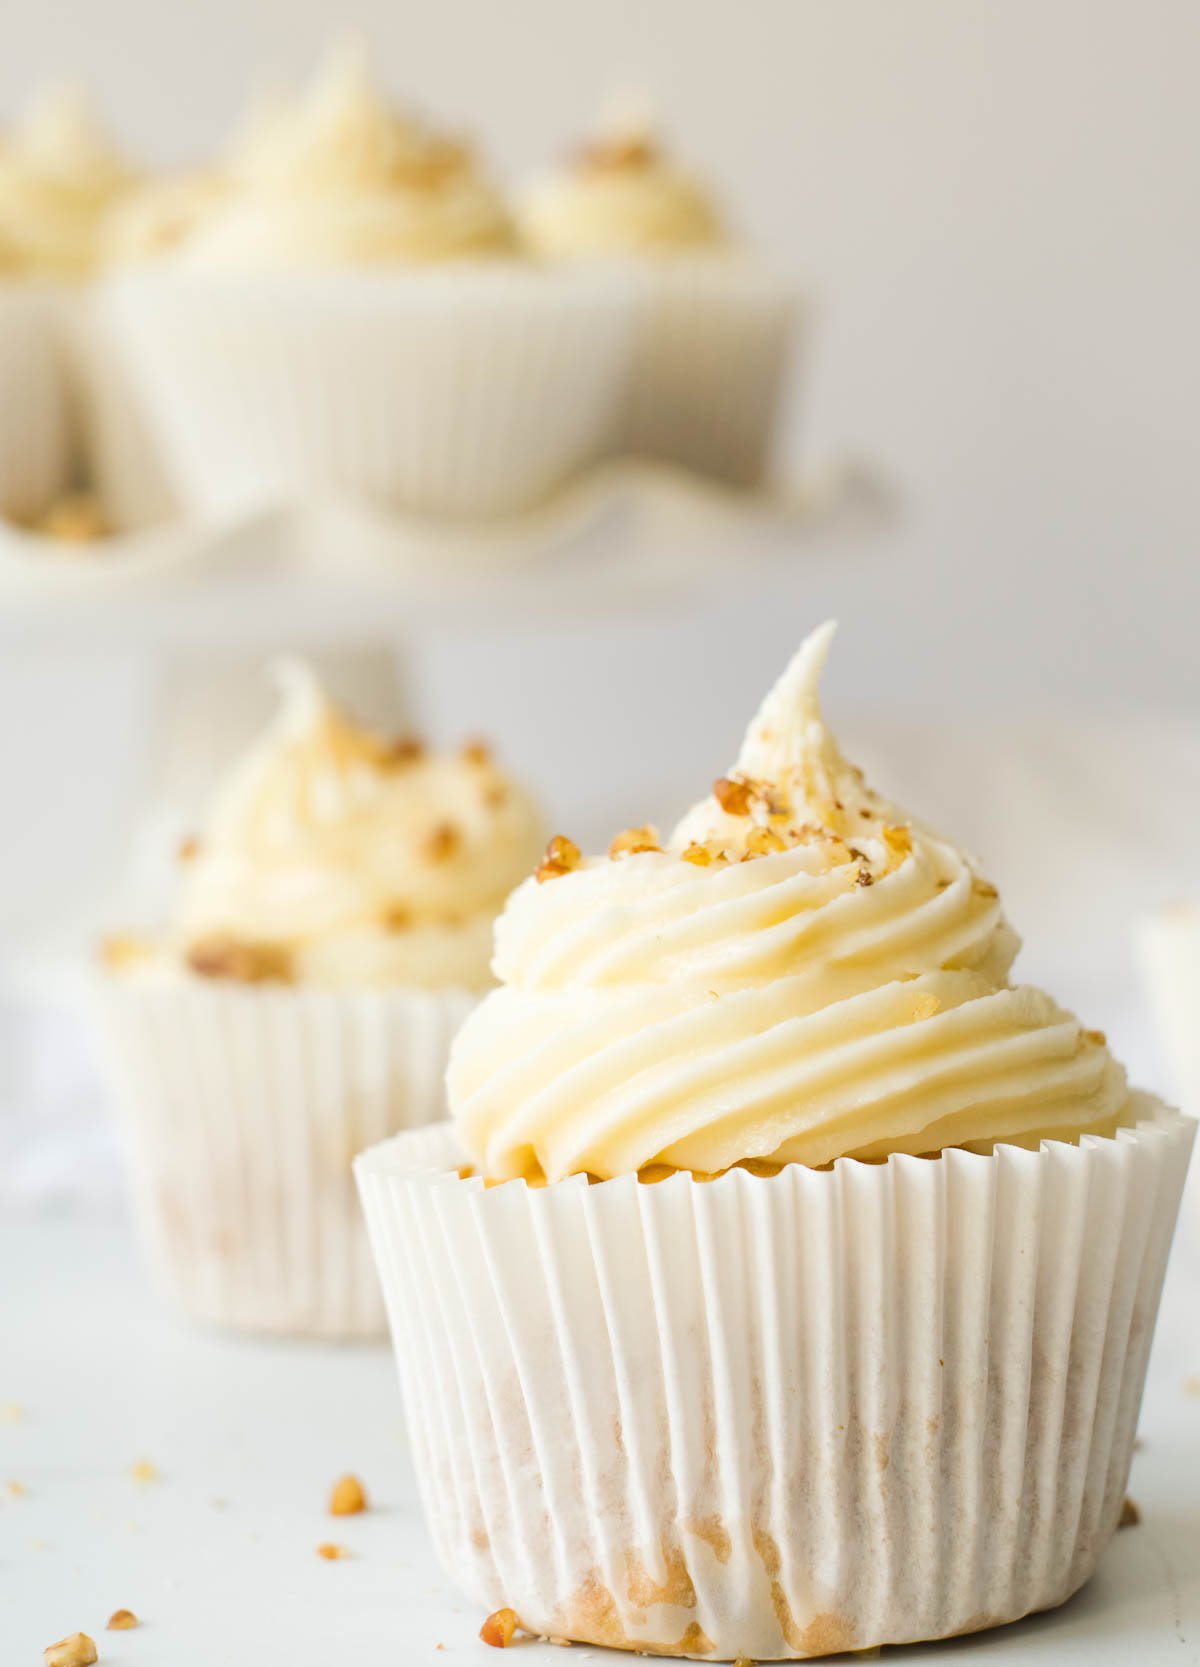 vegan carrot cake cupcakes topped with walnuts